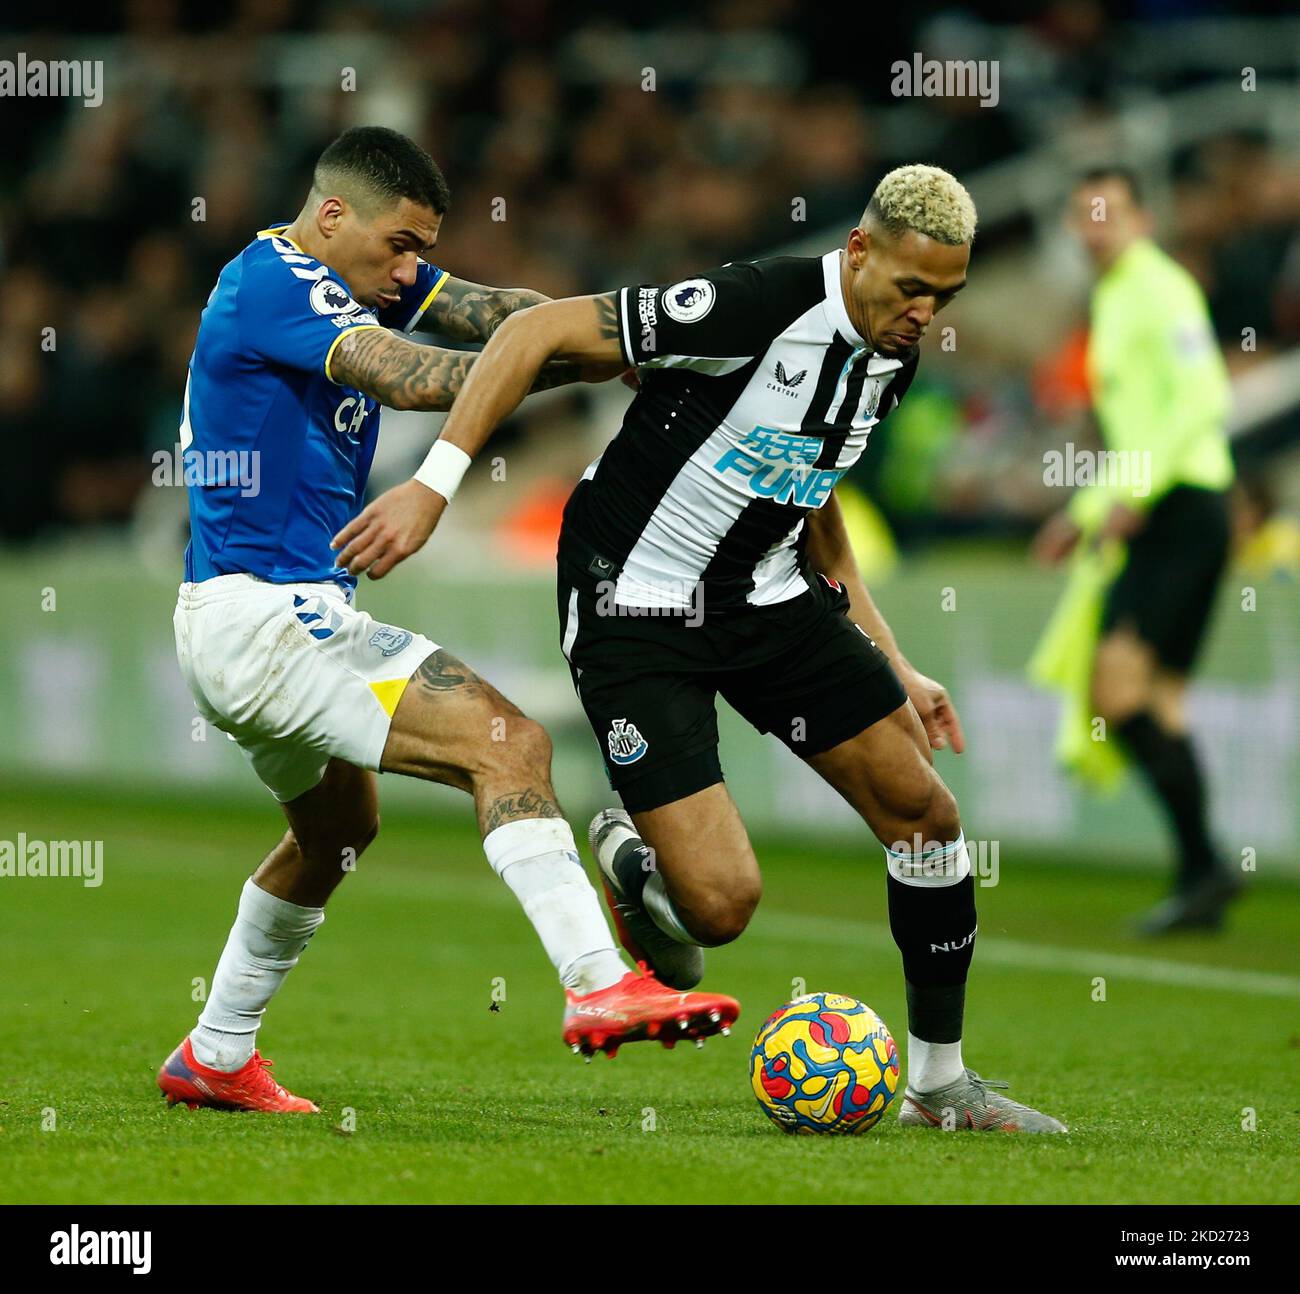 Allan of Everton and Joelinton of Newcastle United in action during the Premier League match between Newcastle United and Everton at St. James's Park, Newcastle on Tuesday 8th February 2022. (Photo by Will Matthews/MI News/NurPhoto) Stock Photo